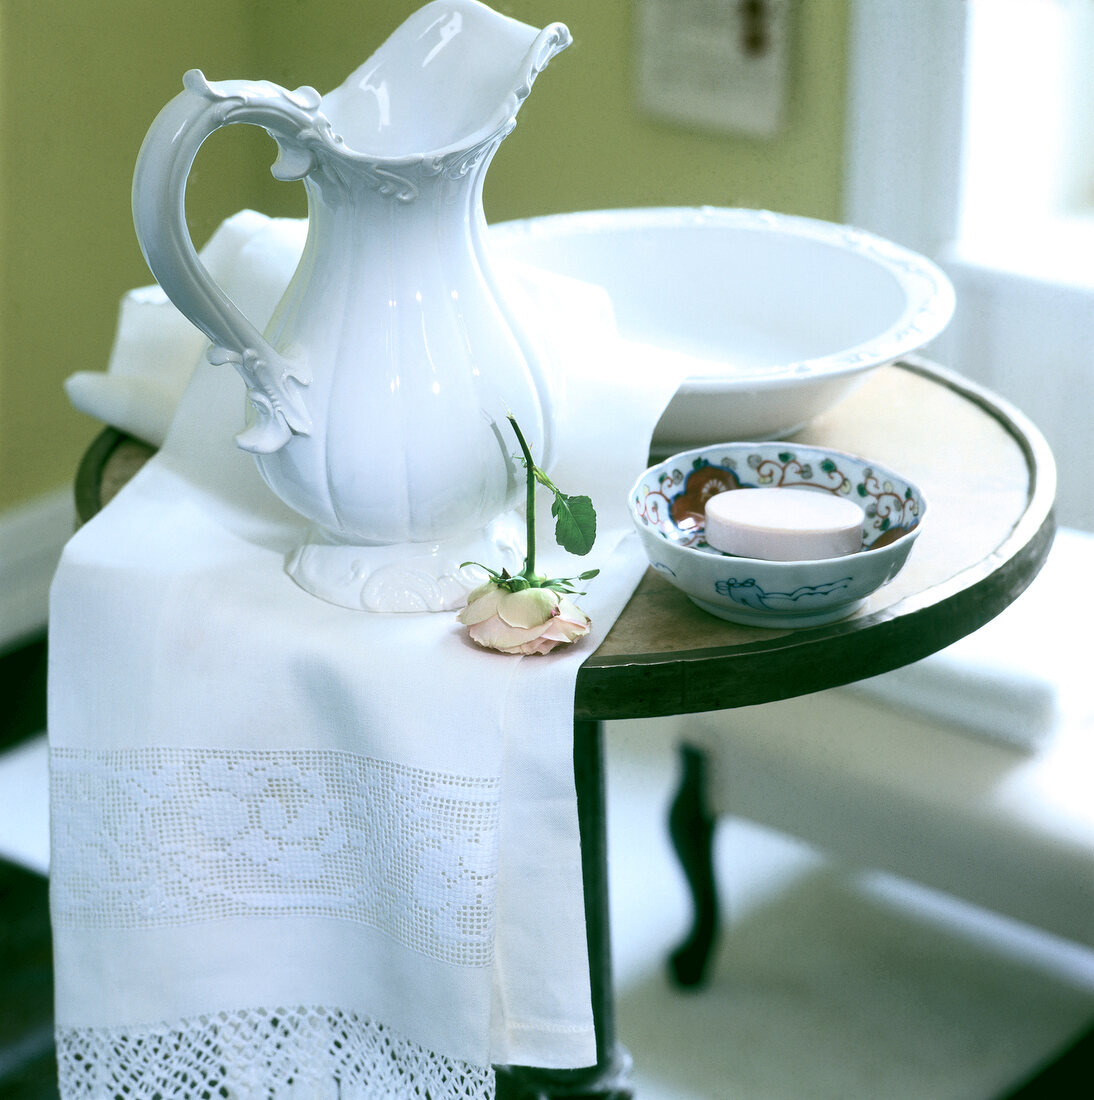 White water jug, bowl, towel, soap and rose on table 